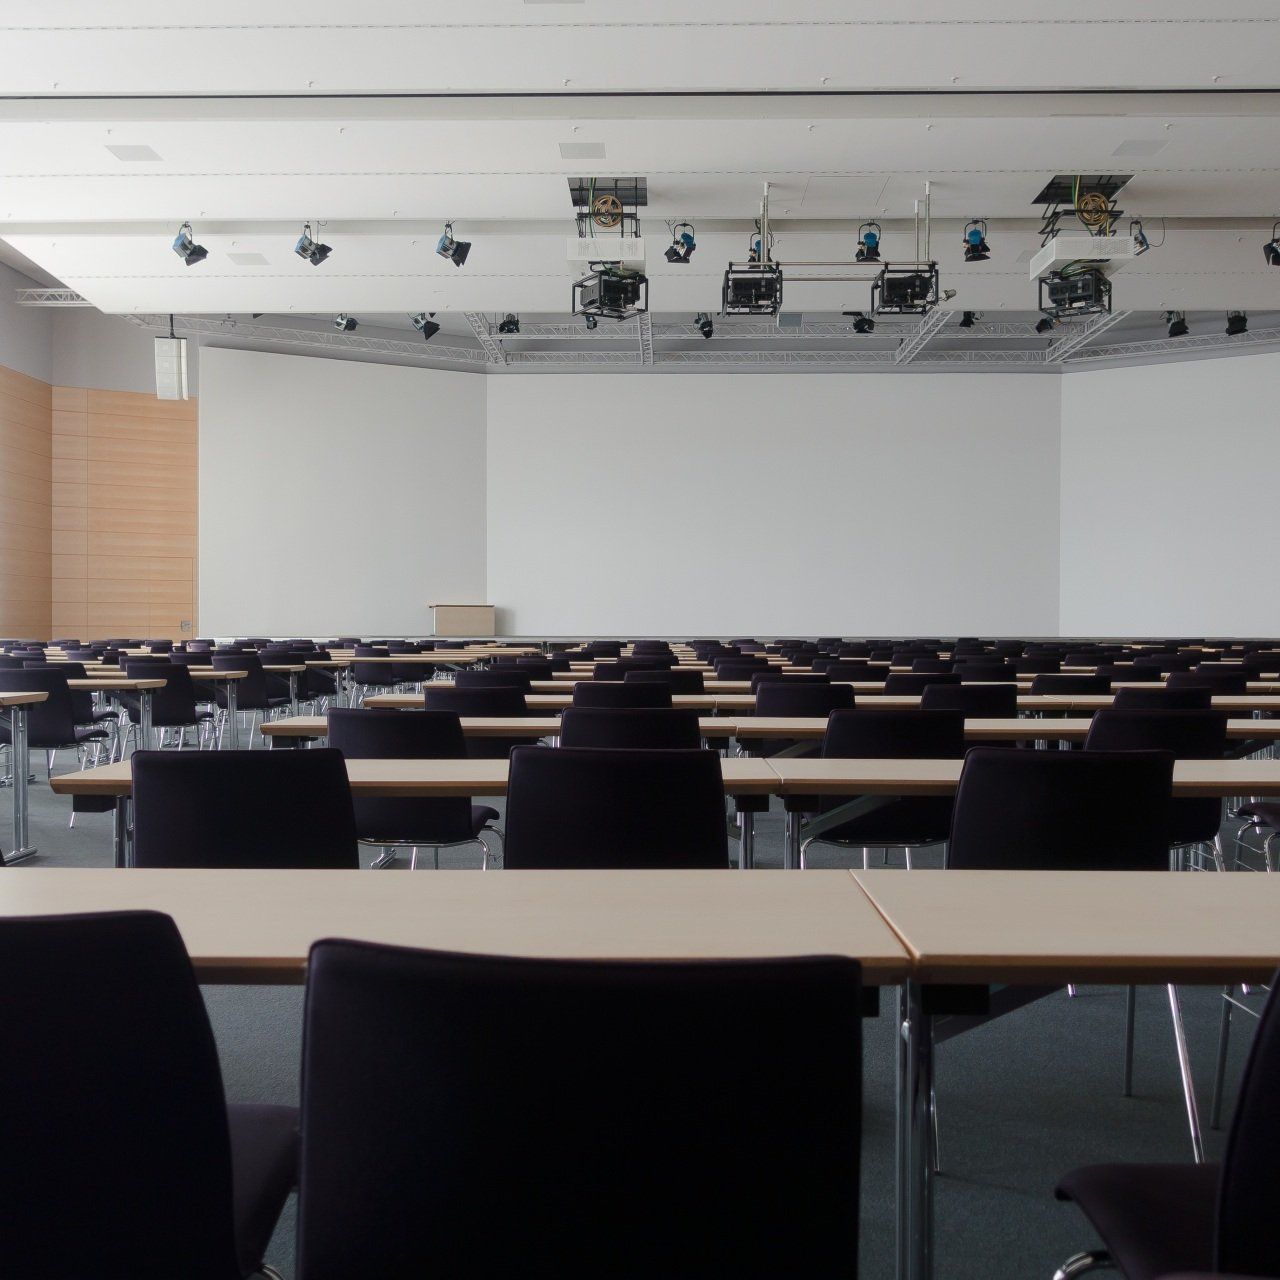 Image of an empty classroom or meeting room with led lighting